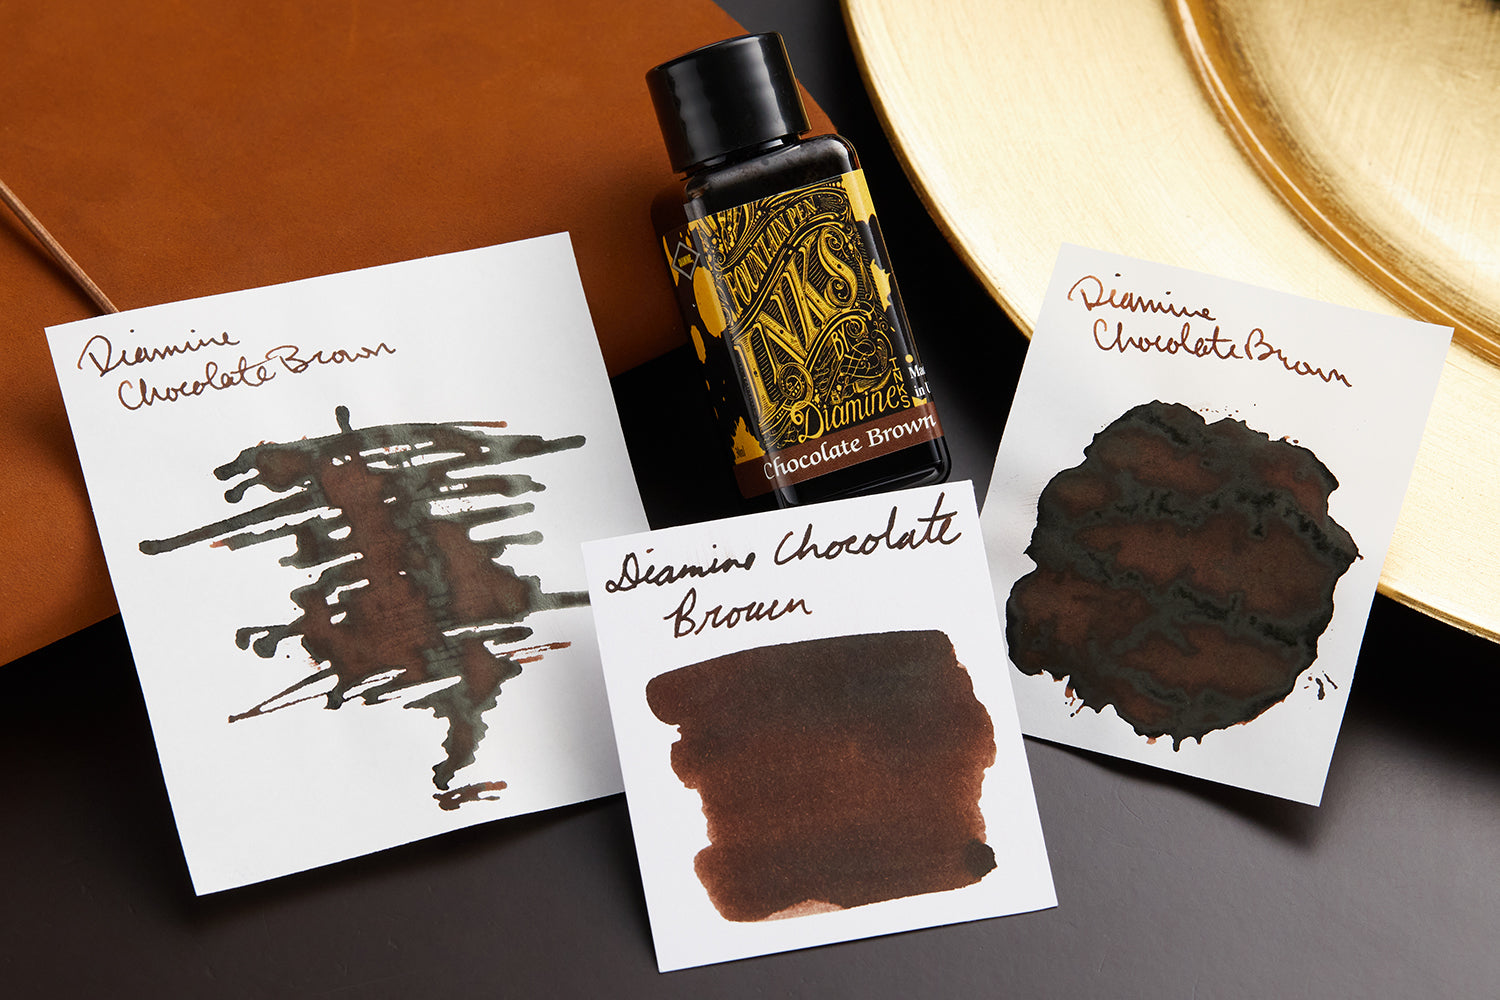 Diamine Chocolate Brown Fountain Pen Ink with ink swab, swatches, writing sample, and bottle on leather desk blotter background.